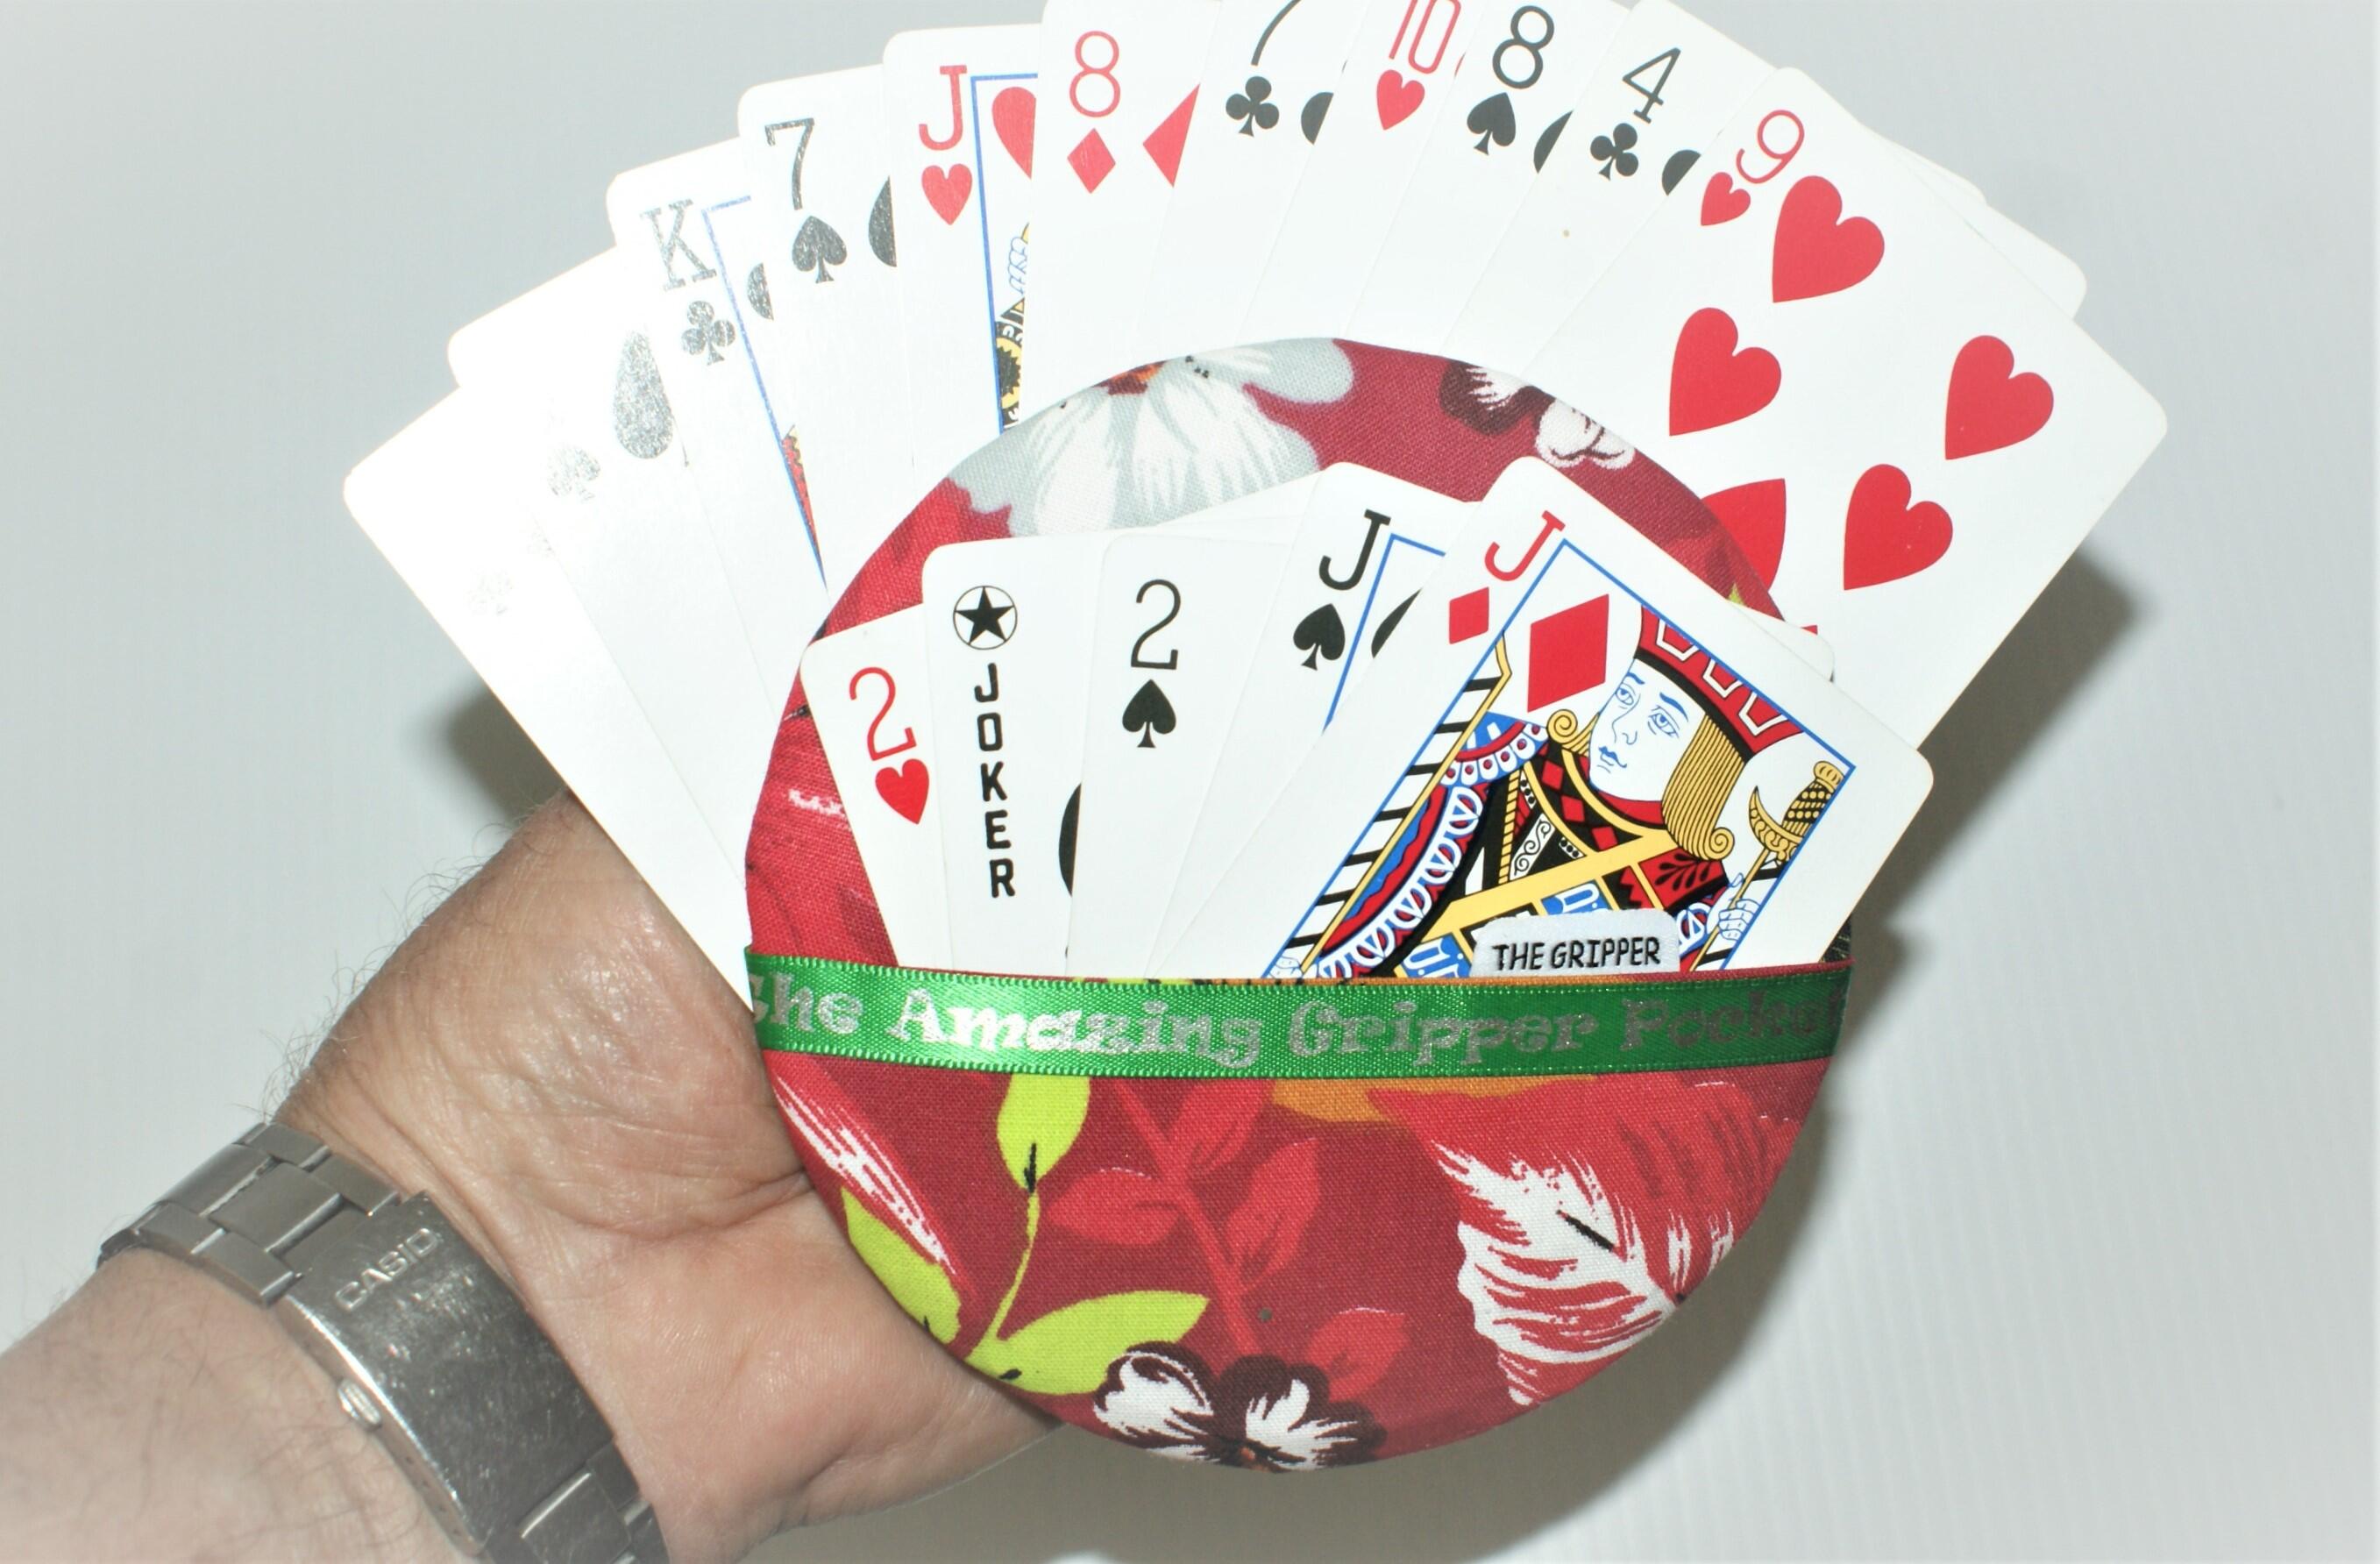 Pocket with cards